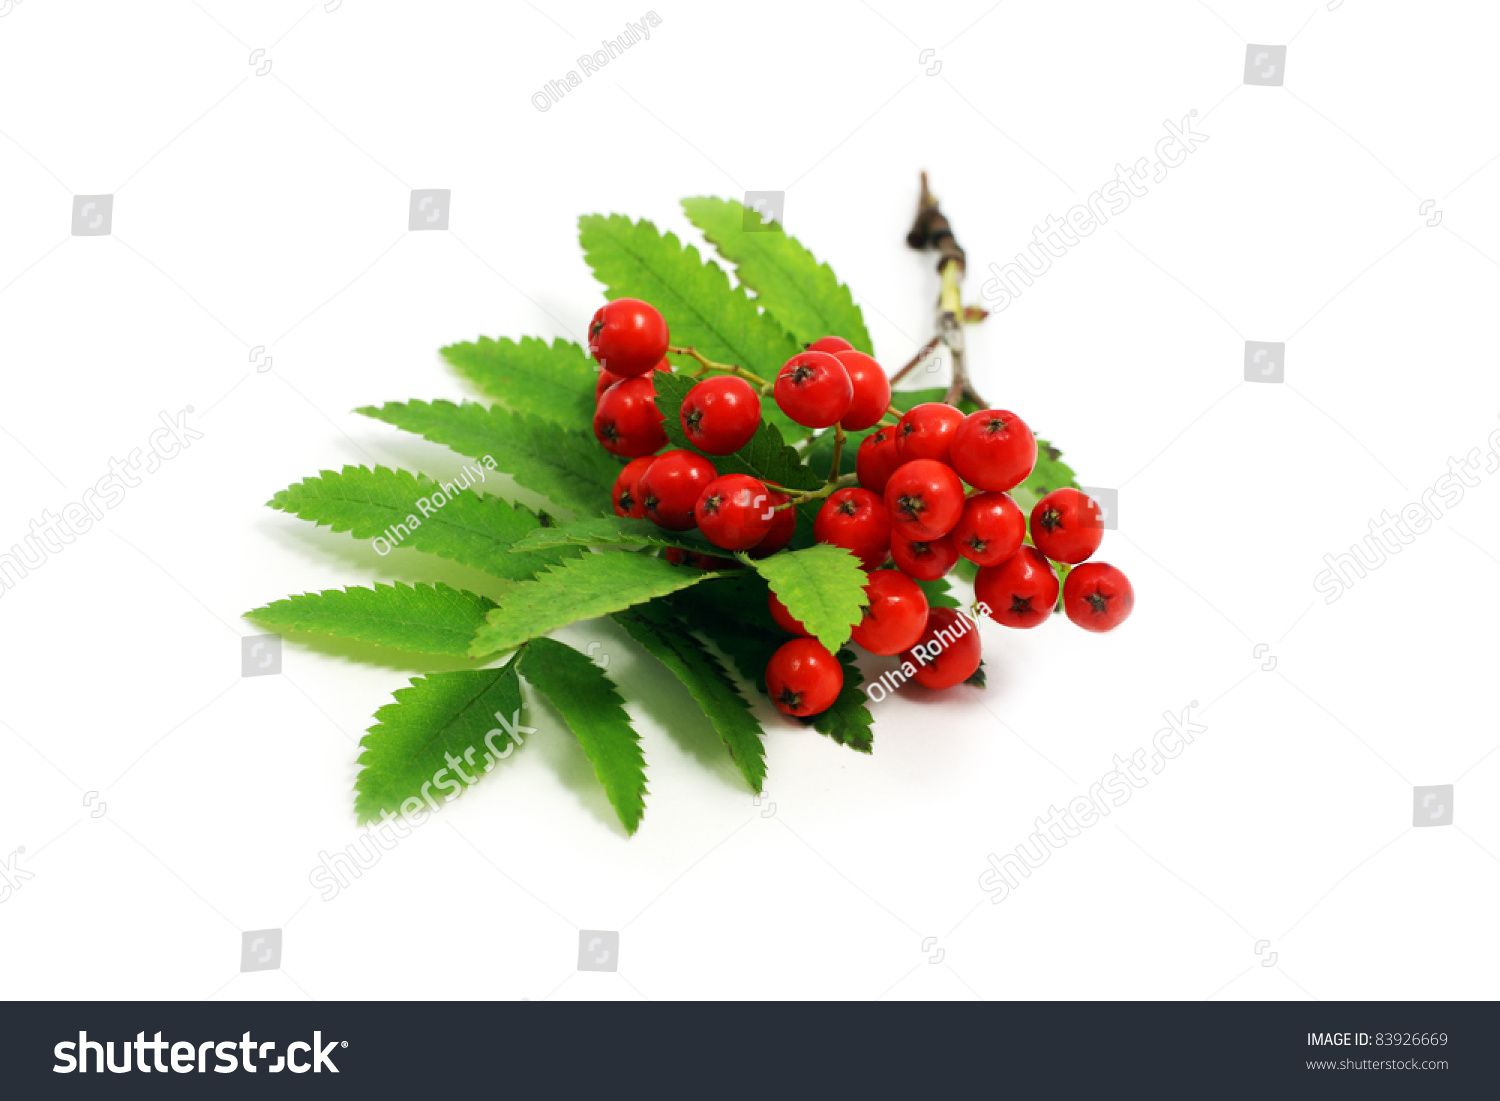 Twig Berries Mountain Ash Over White Stock Photo 83926669 - Shutterstock